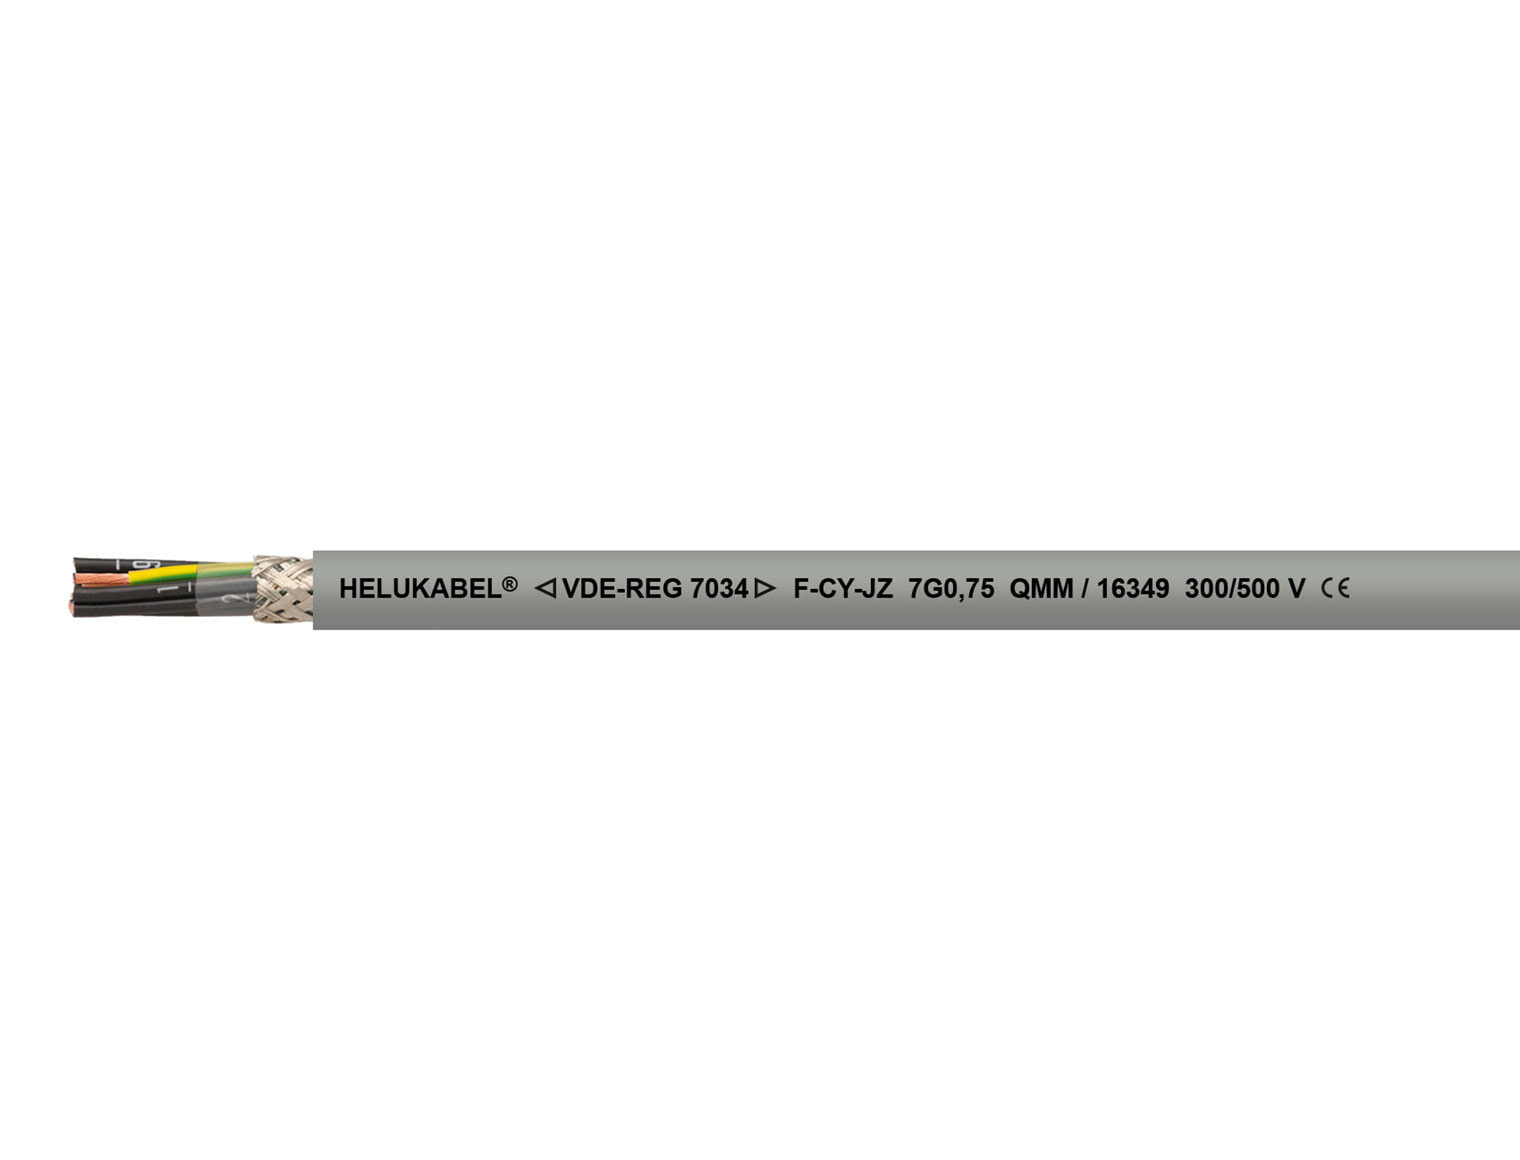 Helukabel F-CY-JZ 4G6qmm GrauSteuerleitung PVC 16429 - Low voltage cable - Grey - Polyvinyl chloride (PVC) - Polyvinyl chloride (PVC) - Cooper - -10 - 80 °C